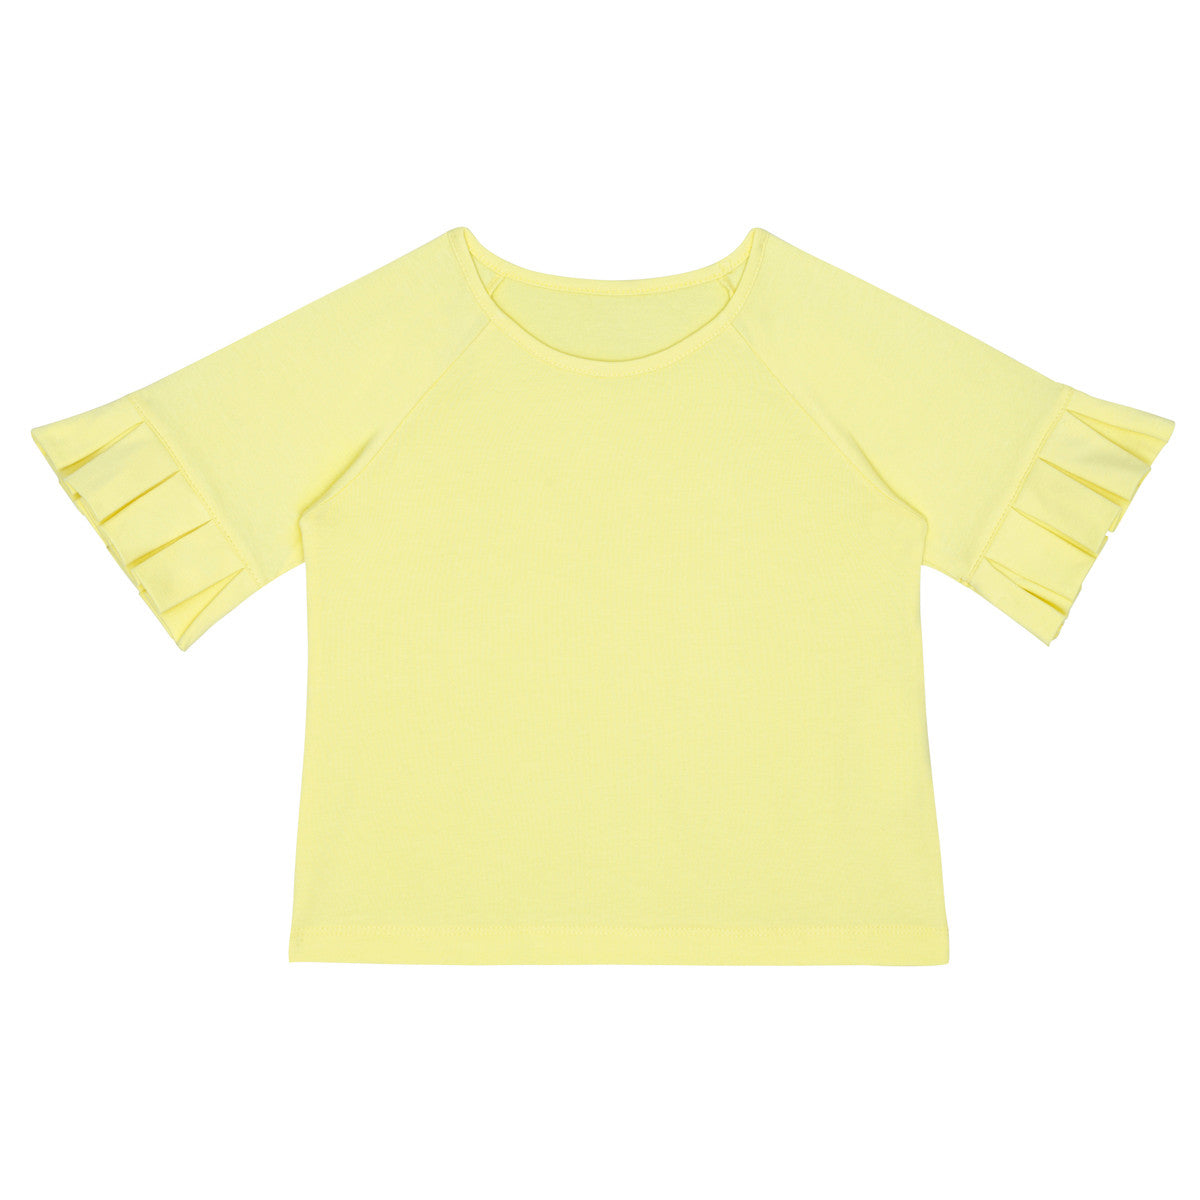 Pleated yellow Little Hedonist shirt for girls. Look like a real fashionista with this shirt! Sustainable kids clothing made from organic cotton.